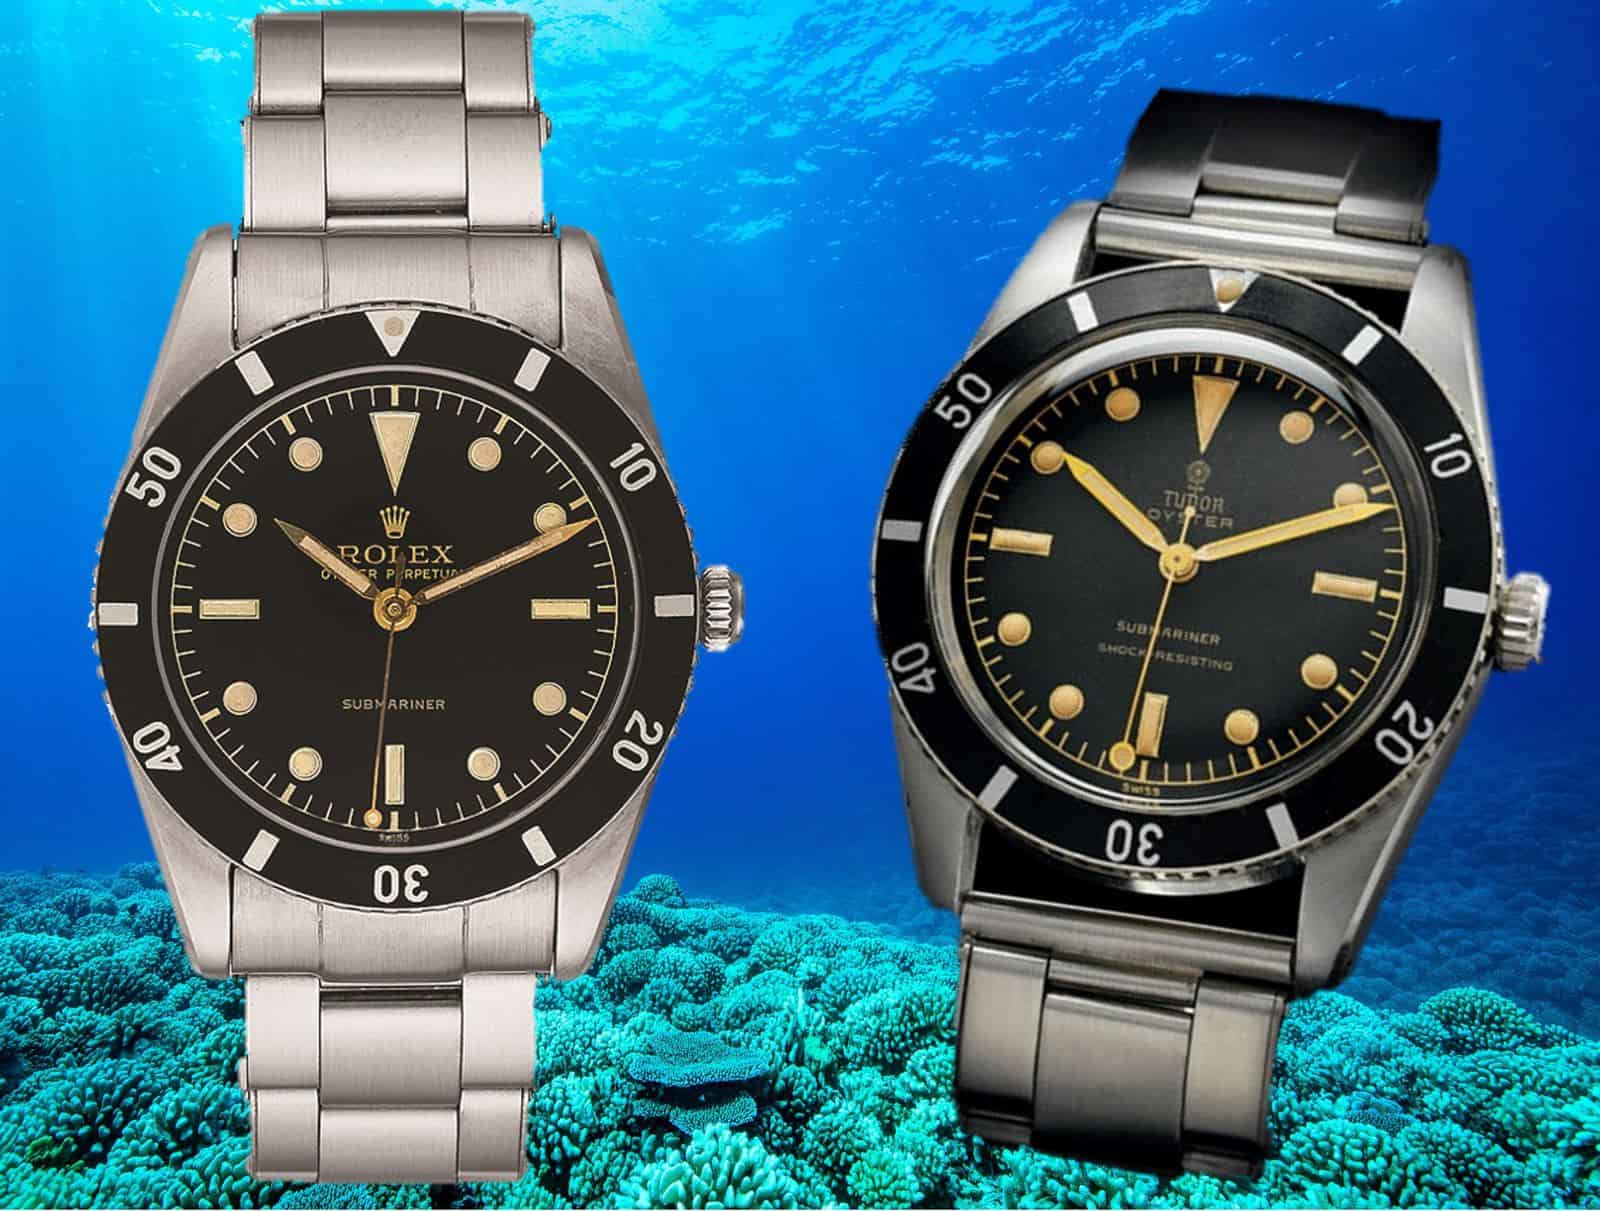 Rolex Oyster Perpetual Submariner versus Tudor Oyster Prince Submariner 1954